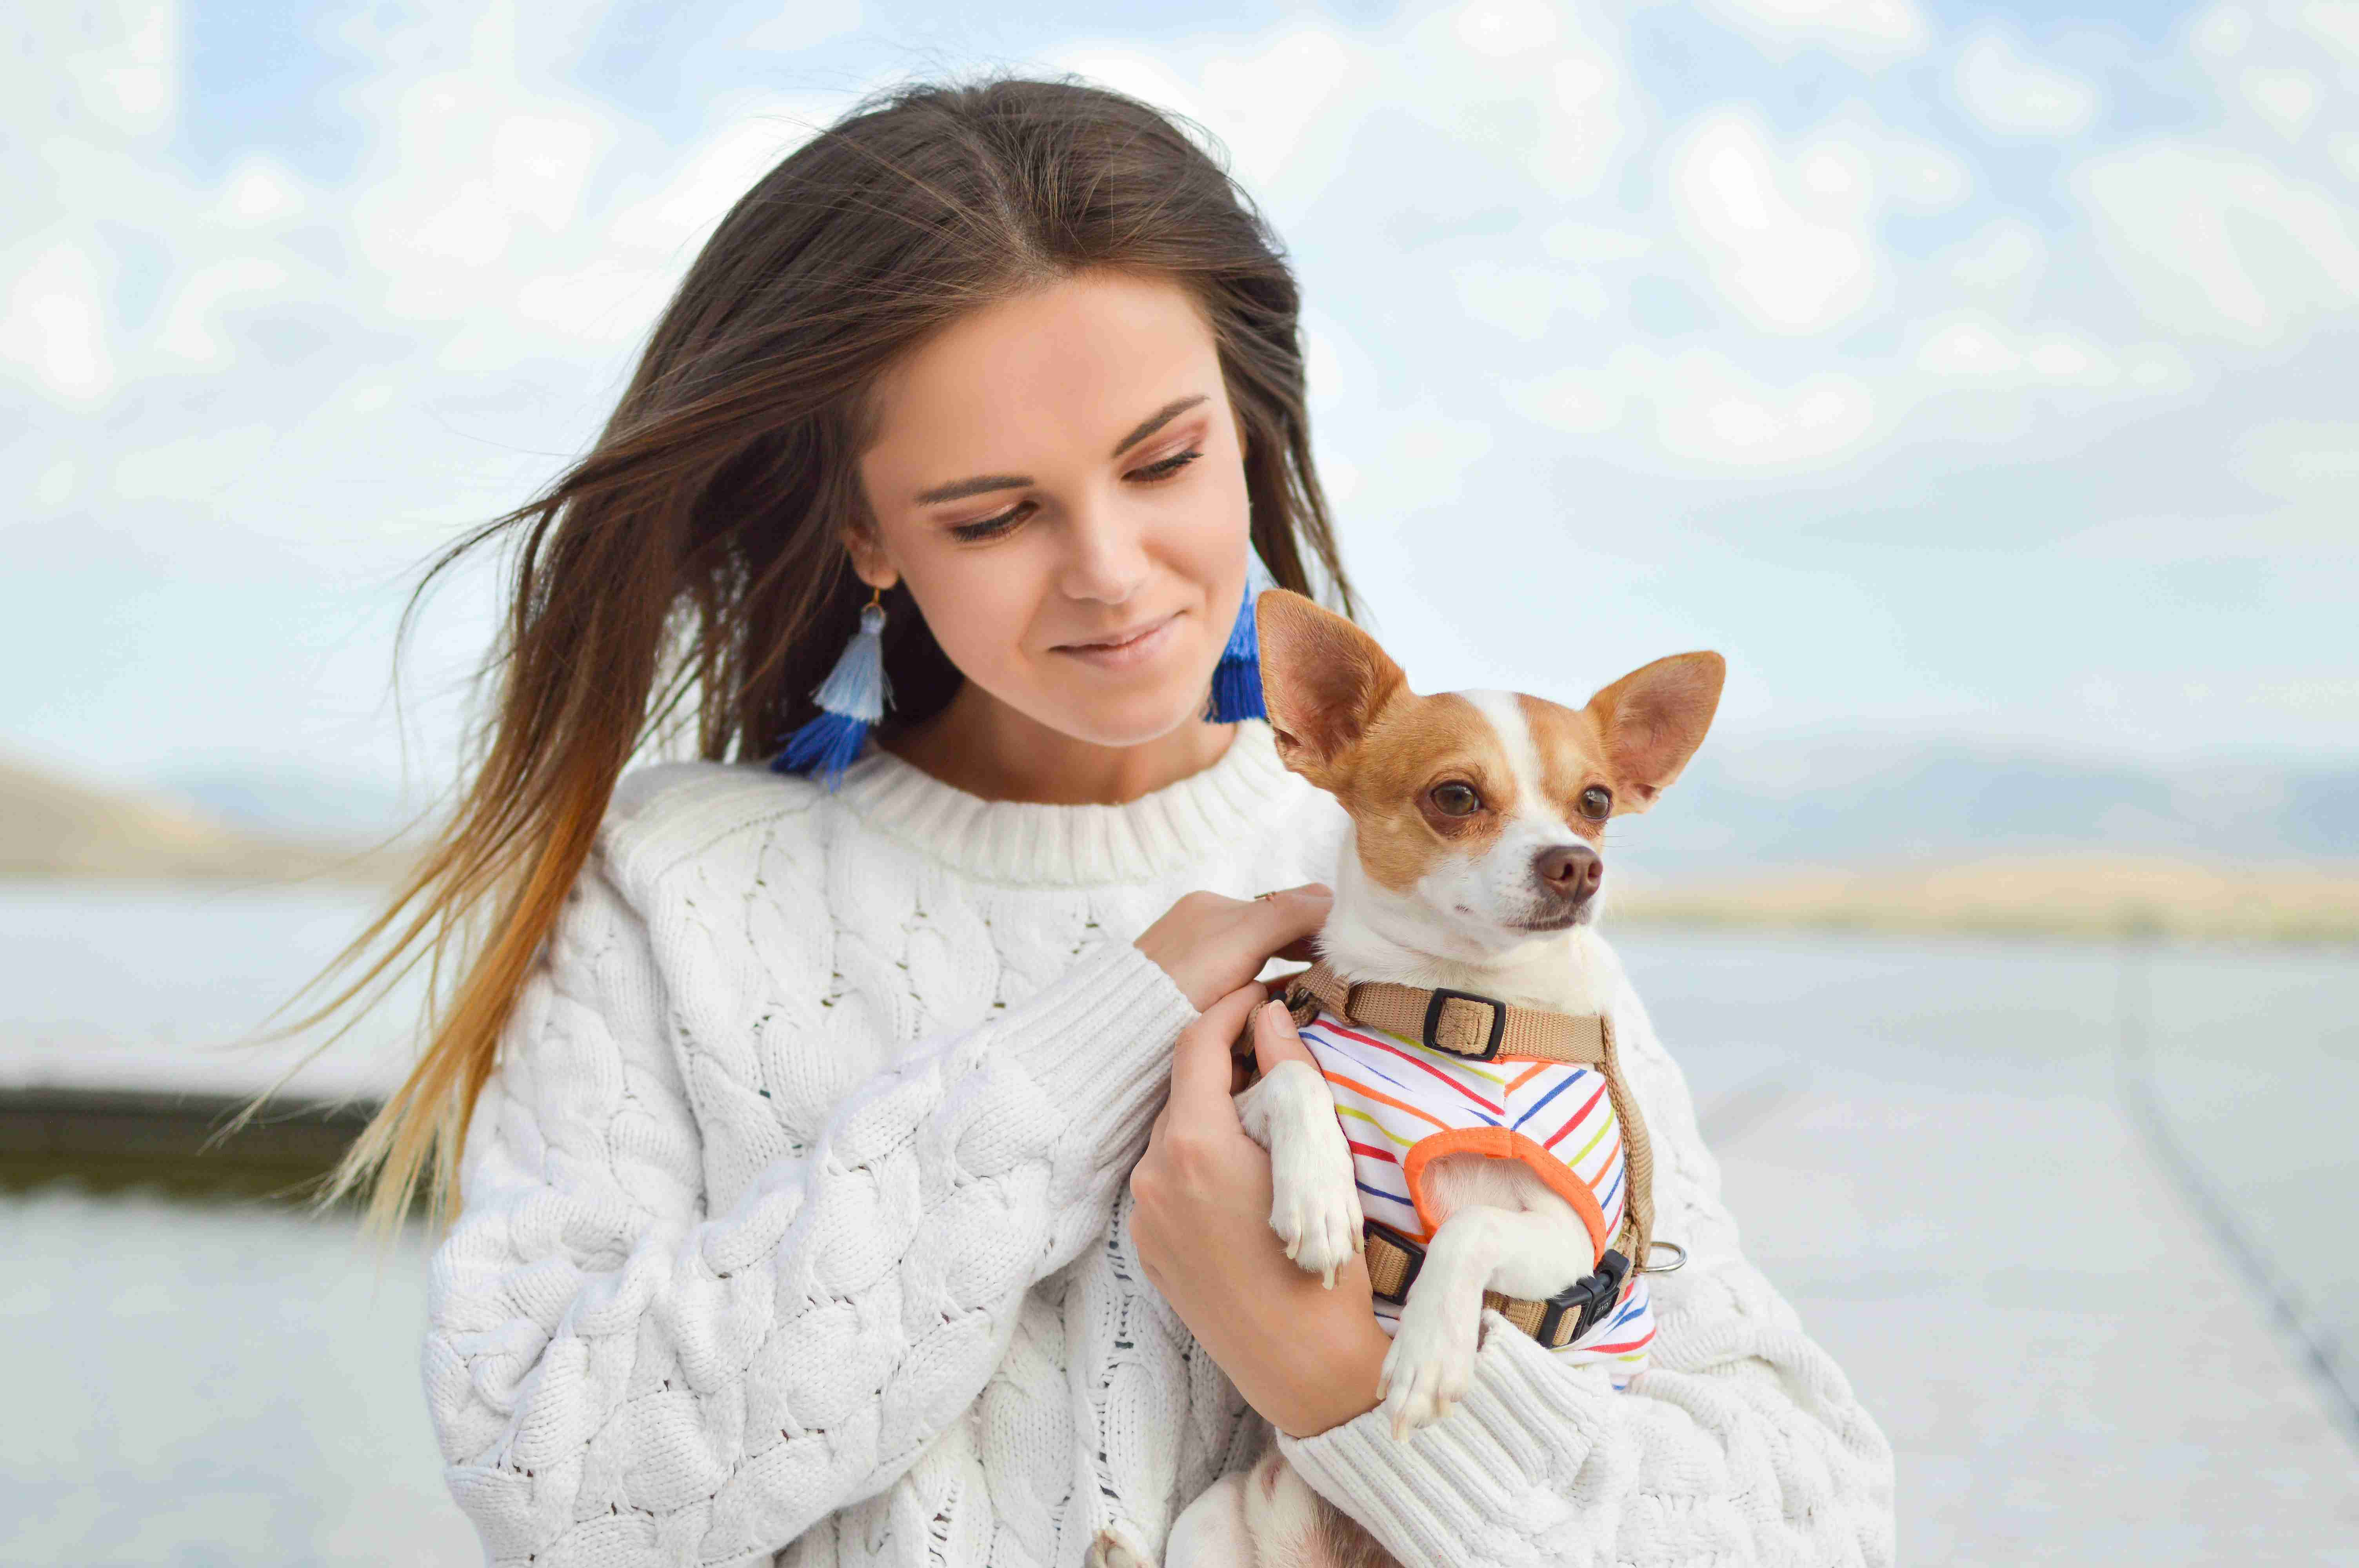 How can I help my Chihuahua feel more secure and less anxious?